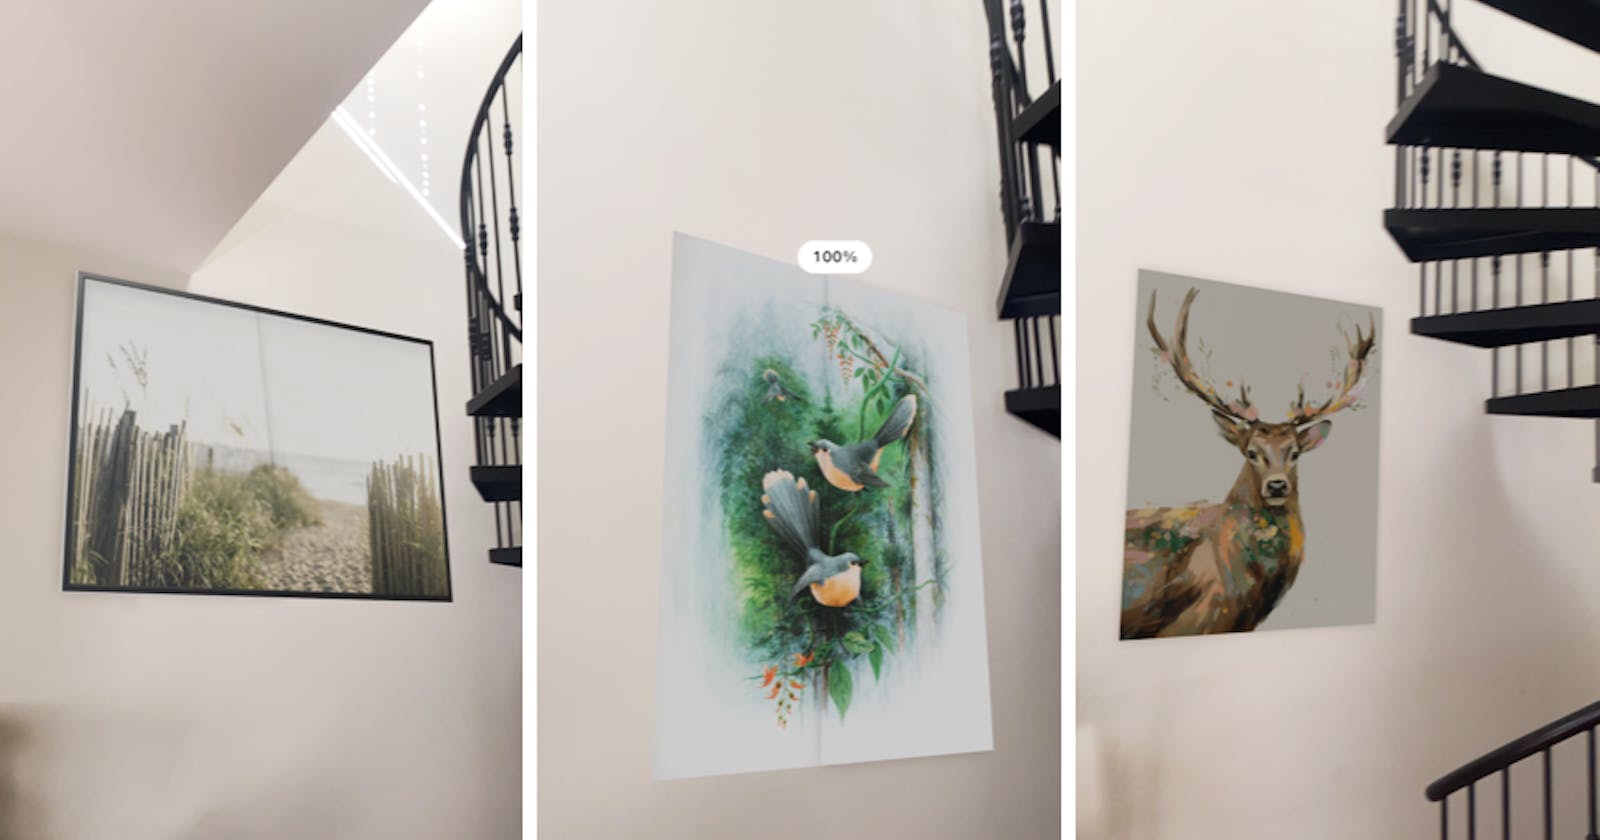 Preview Art In Your Home in Augmented Reality for Free (Tutorial)